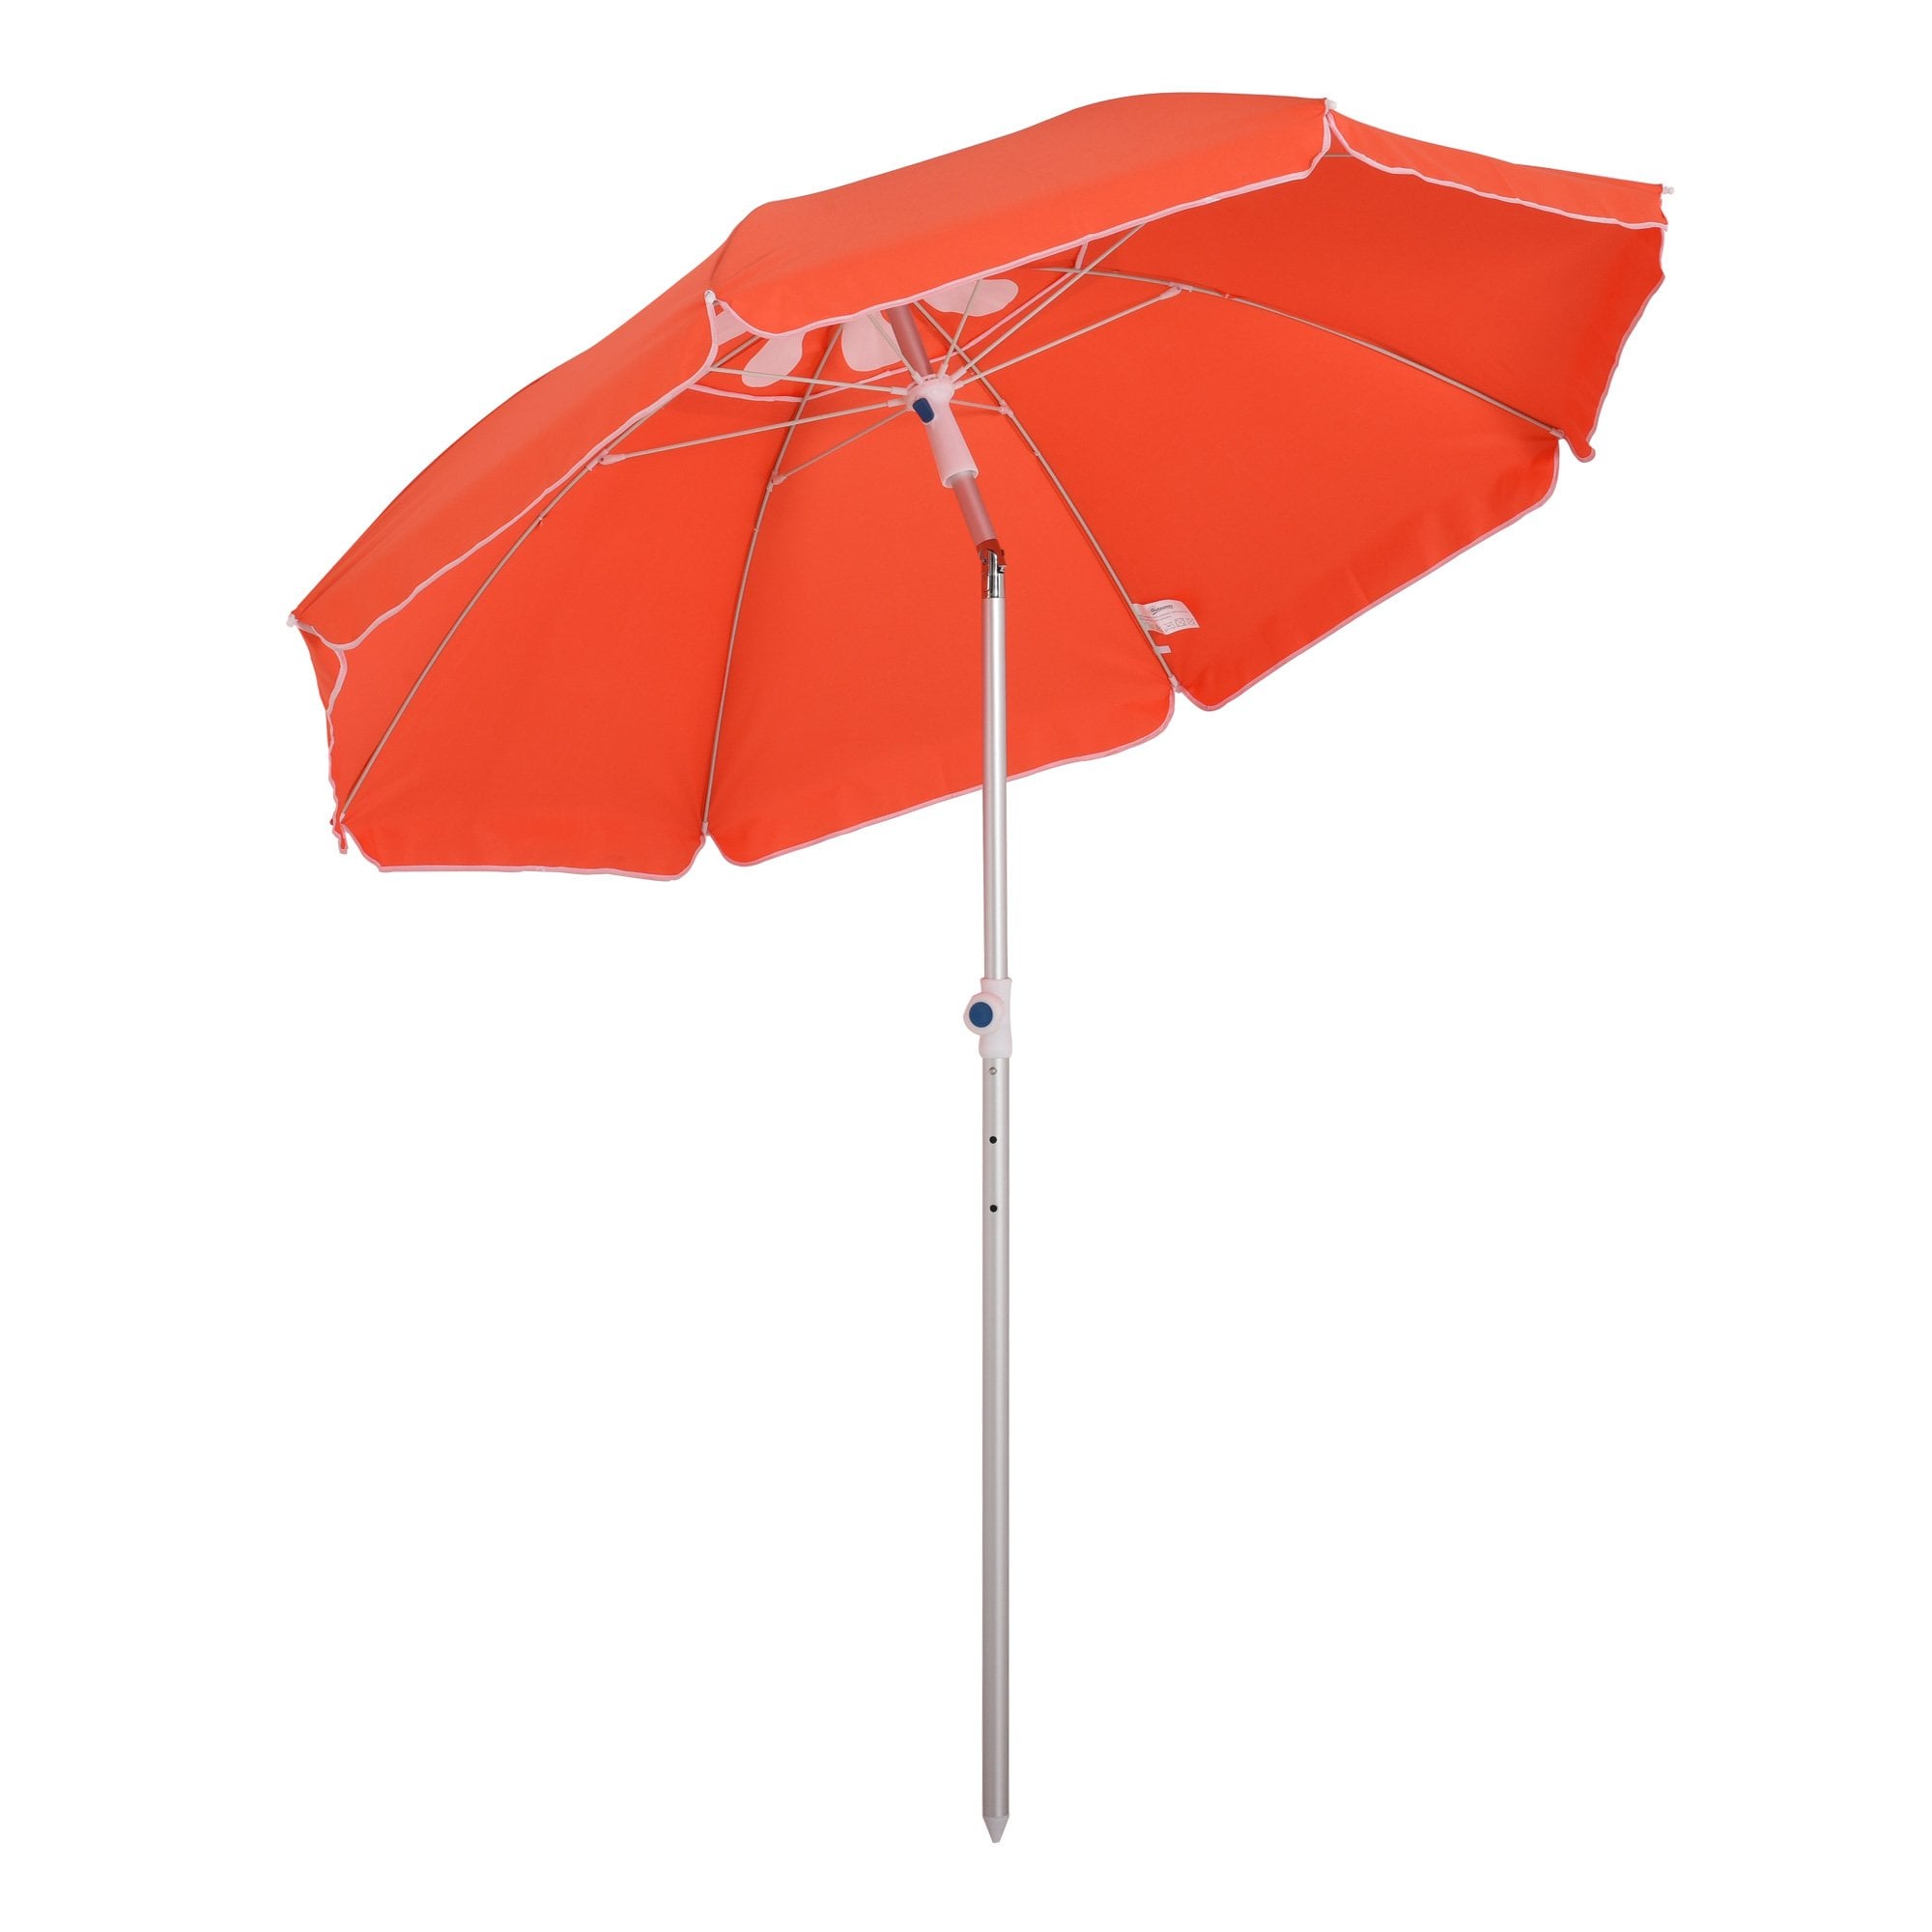 Oasis 1.9 m Beach Umbrella Parasol with Adjustable Angle and Carry Bag - Orange - Oasis Outdoor  | TJ Hughes